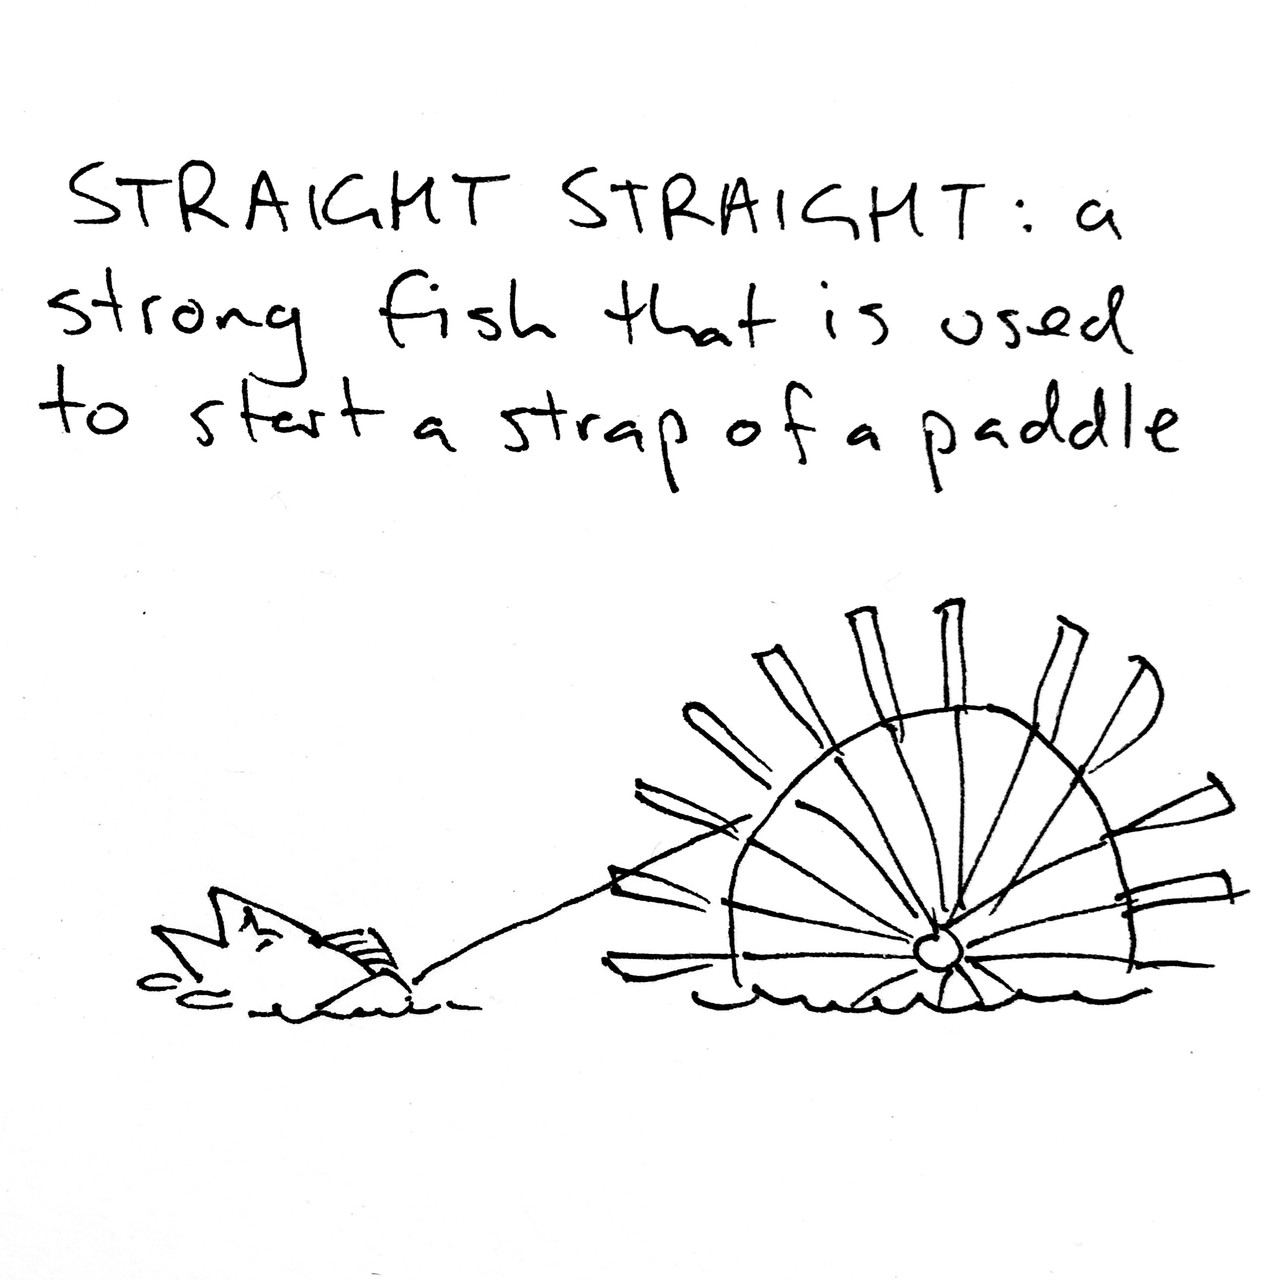 STRAIGHT STRAIGHT: a strong fish that is used to start a strap of a paddle. The drawing shows a fish in harness at the left, attached by a cord to a paddle wheel at the right.